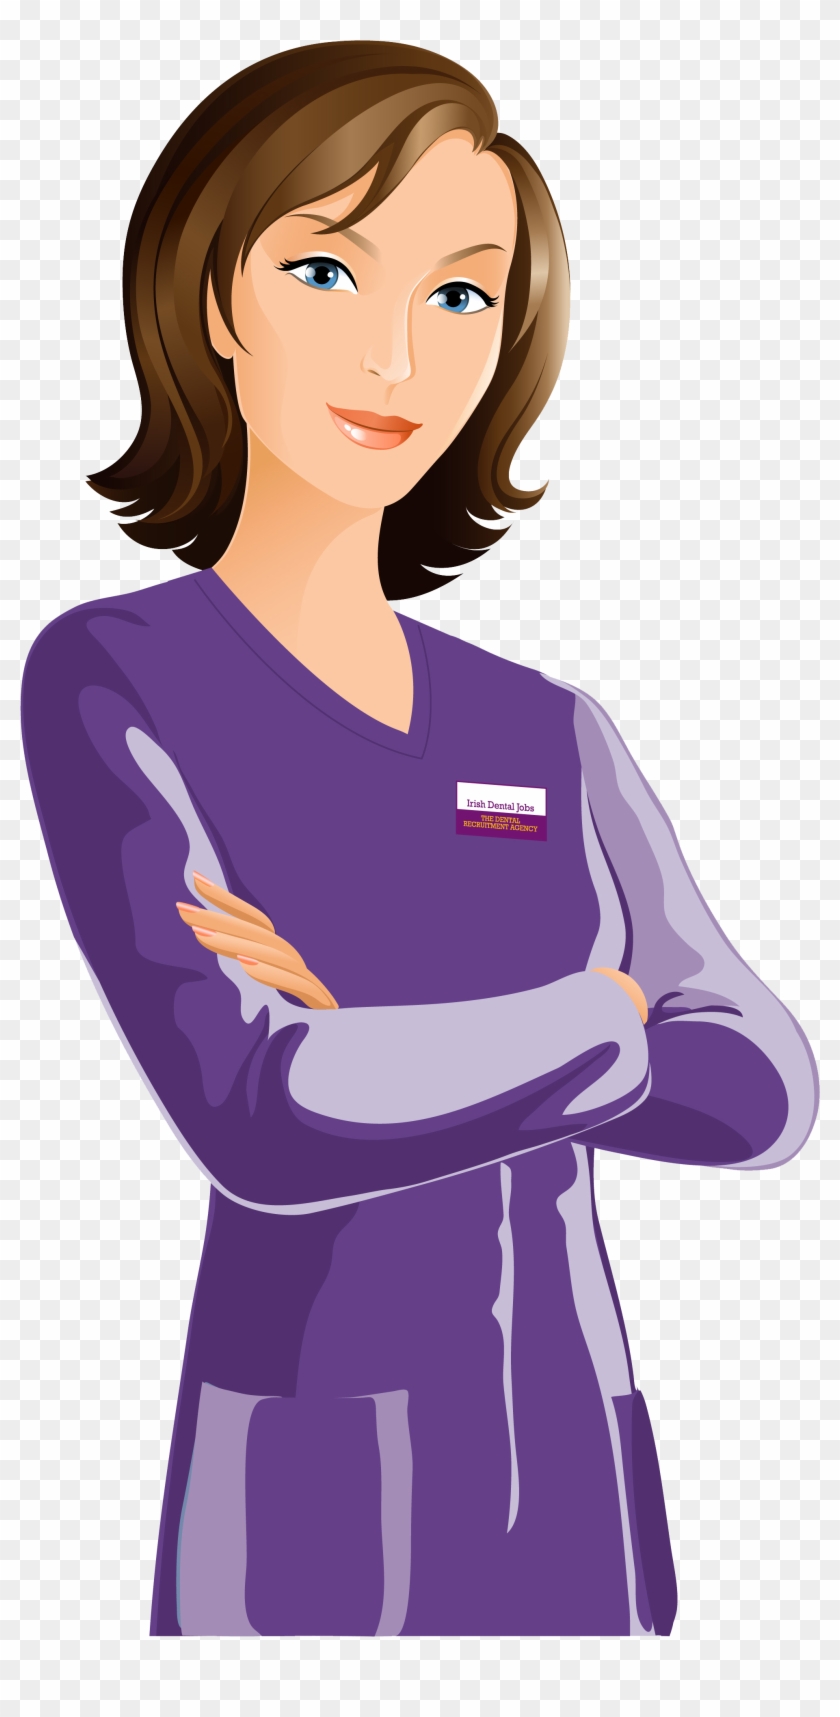 People Matter To Us - Dental Assistant Cartoon Png Clipart #4926118